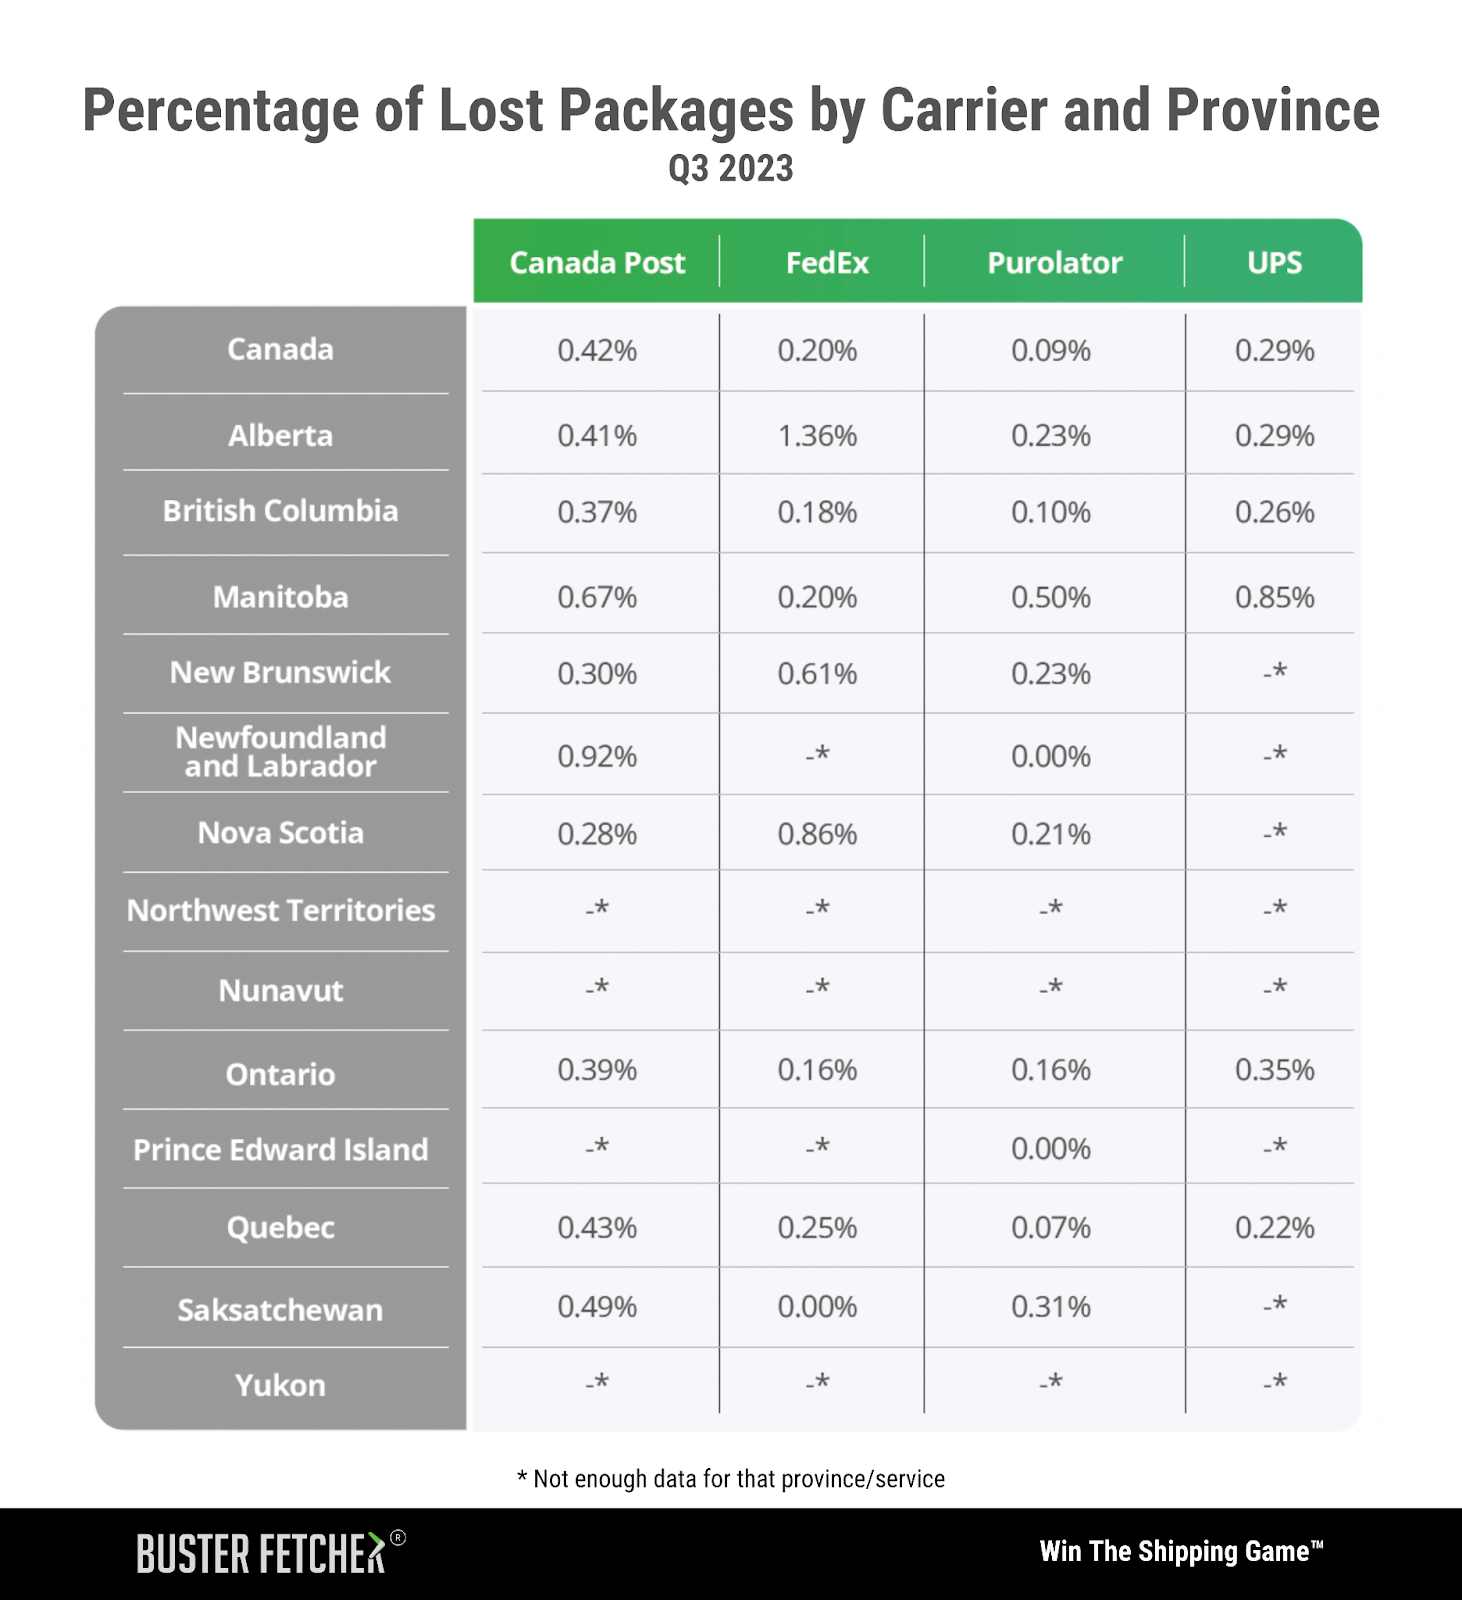 % of lost packages by carrier and province